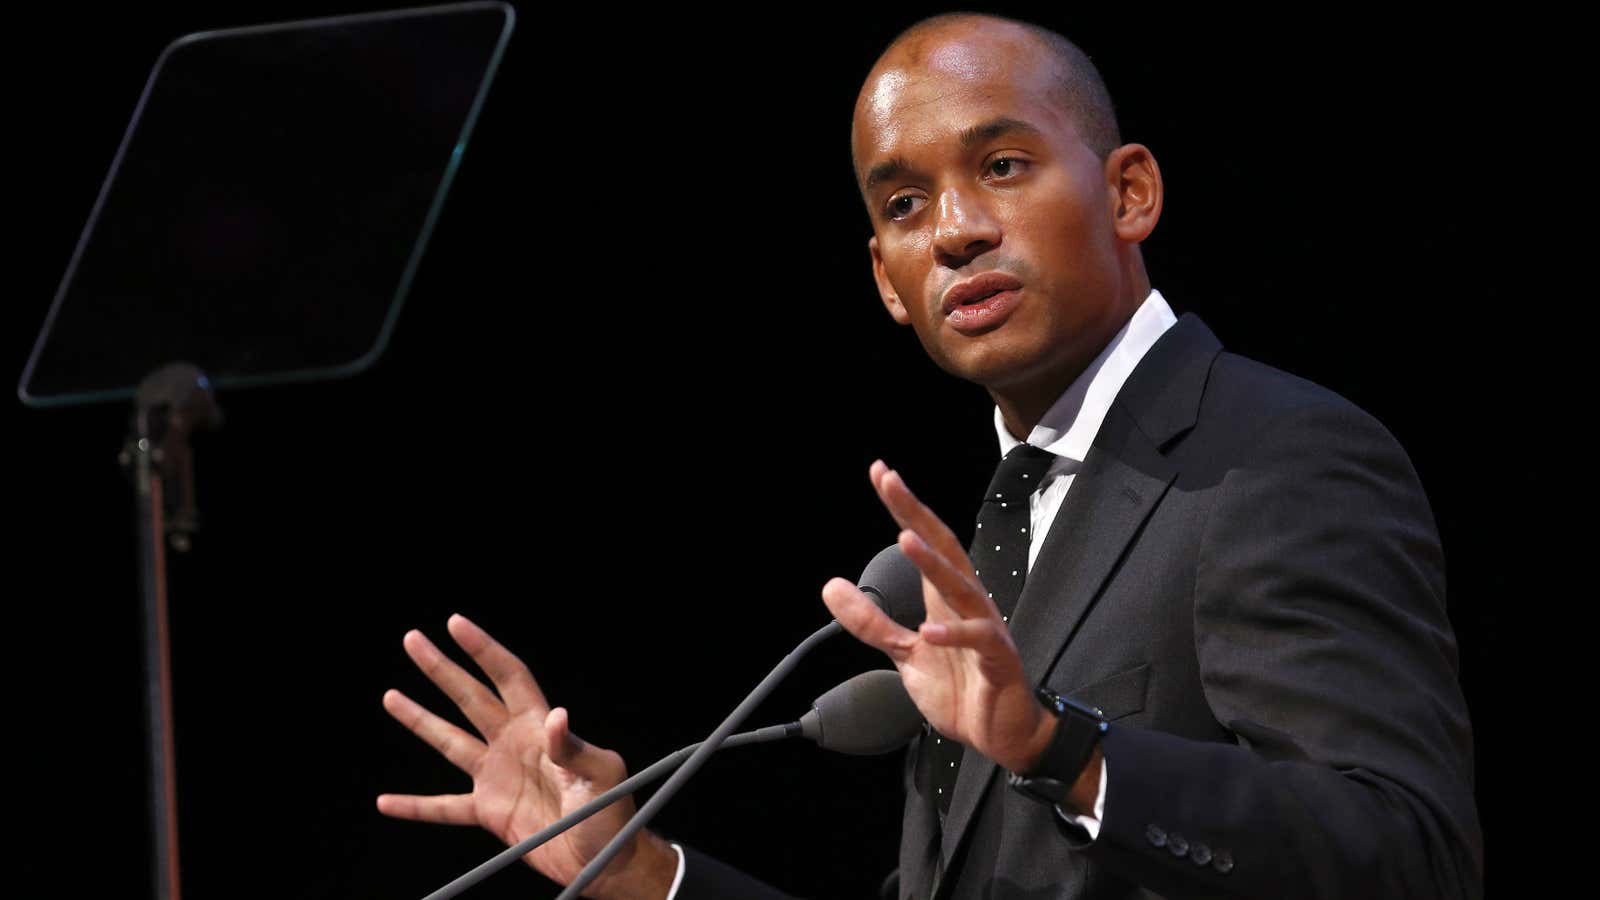 Britain’s opposition Labour Party Business Secretary Chuka Umunna is running for party leadership